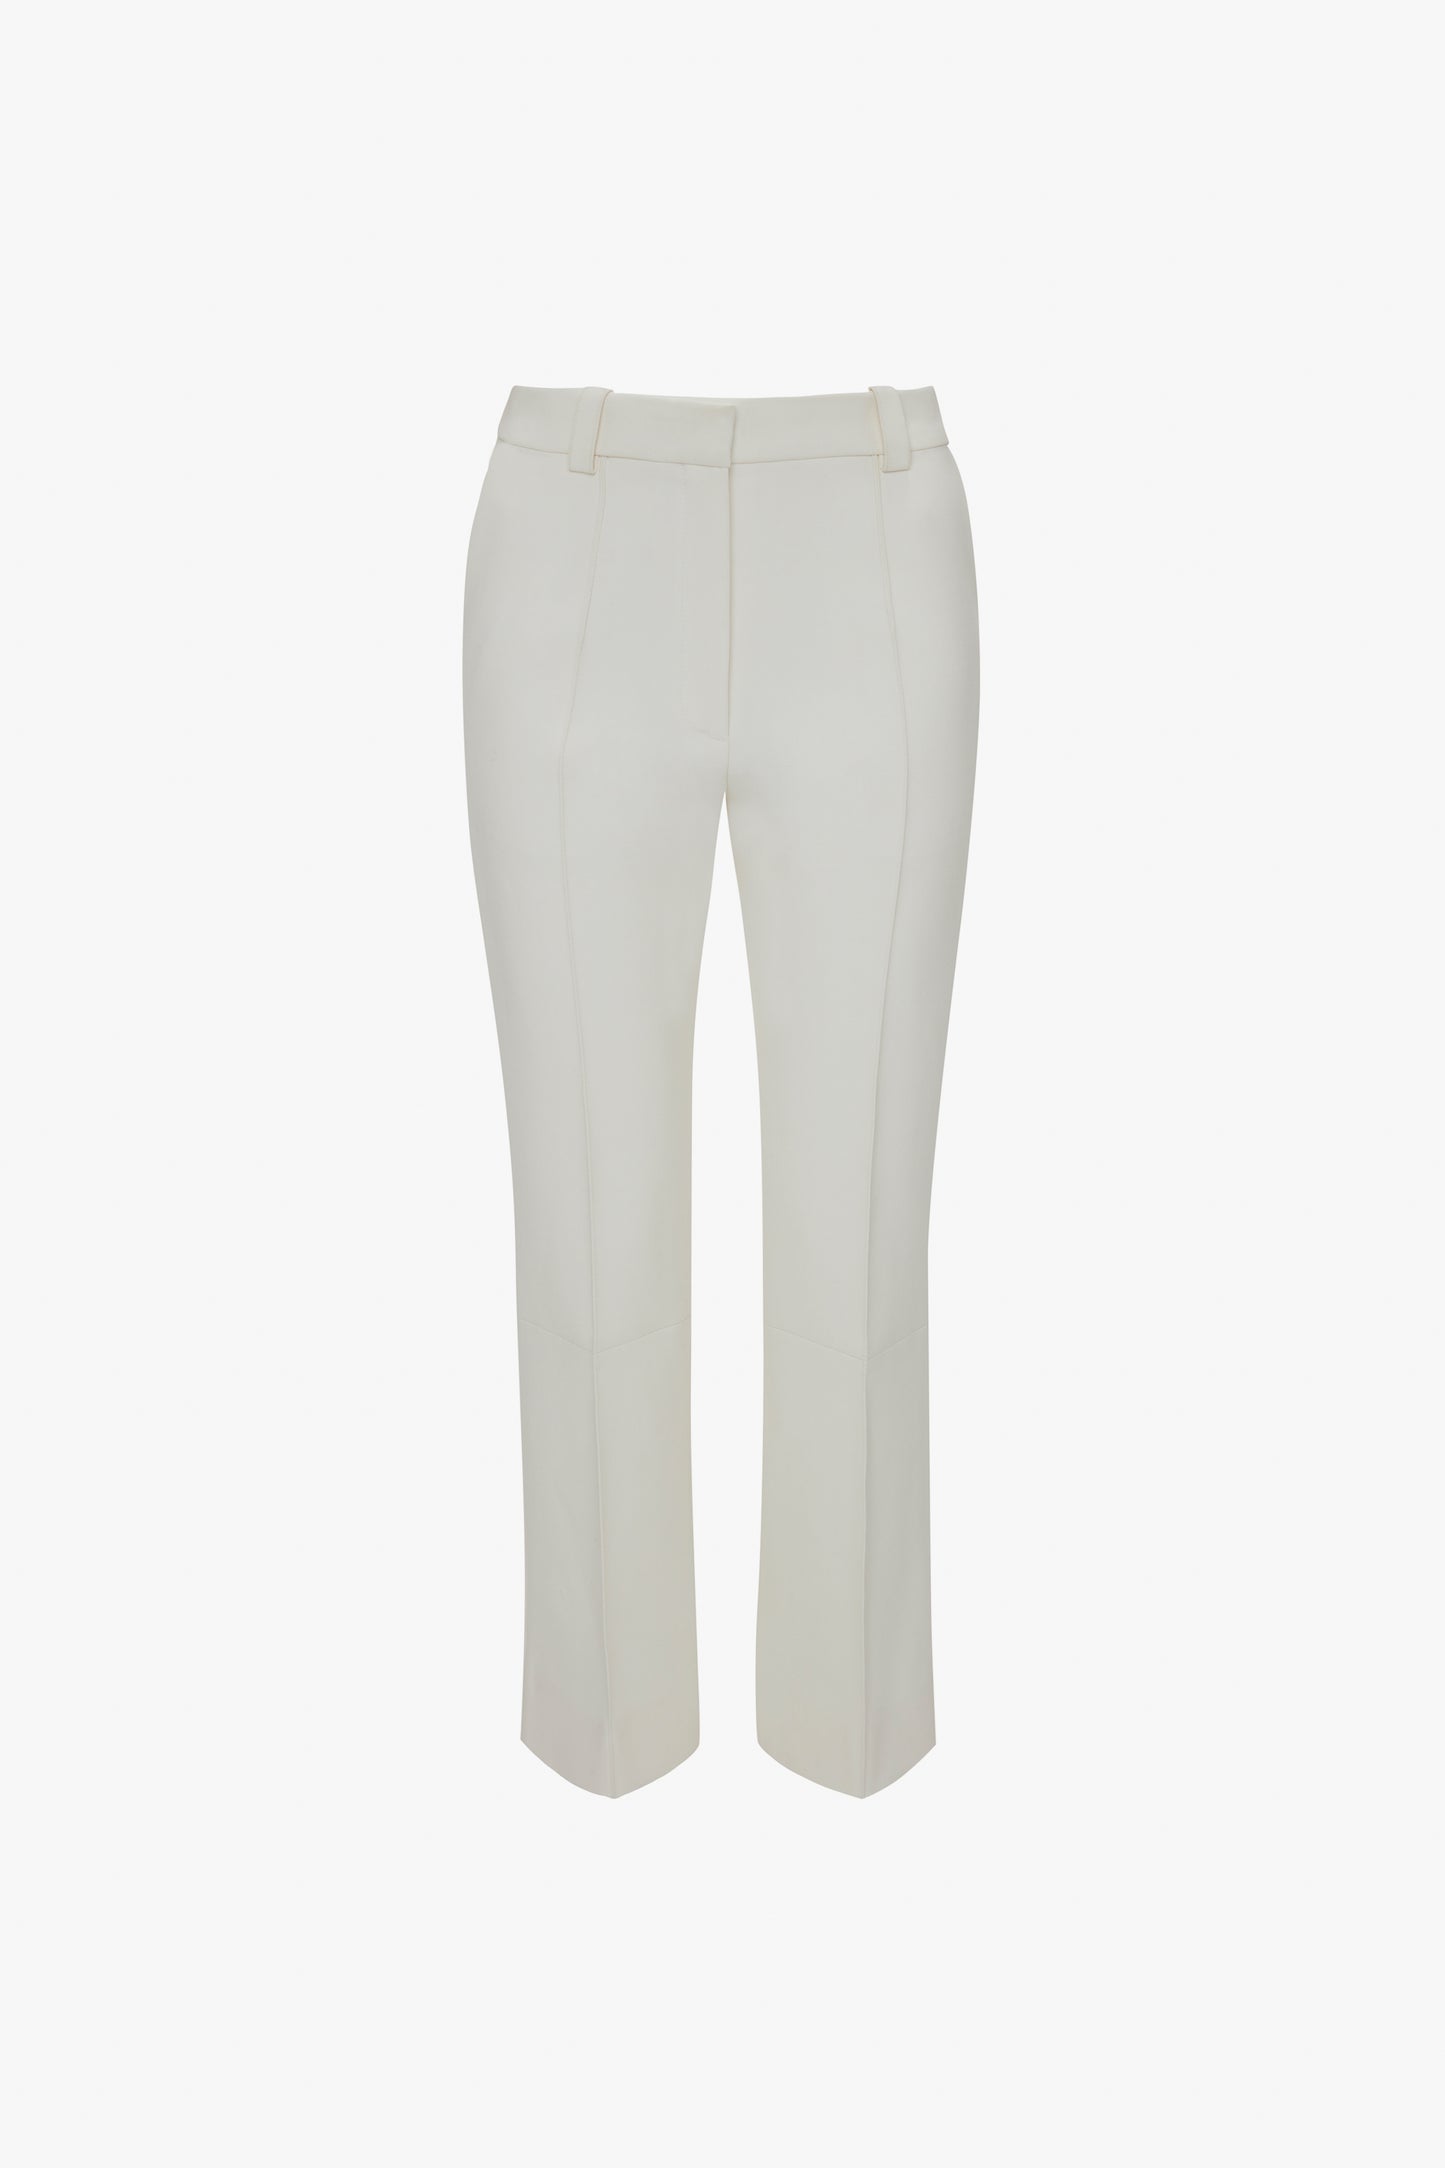 A pair of white Victoria Beckham cropped kick trousers in ivory with a high waist and belt loops, displayed against a plain background.